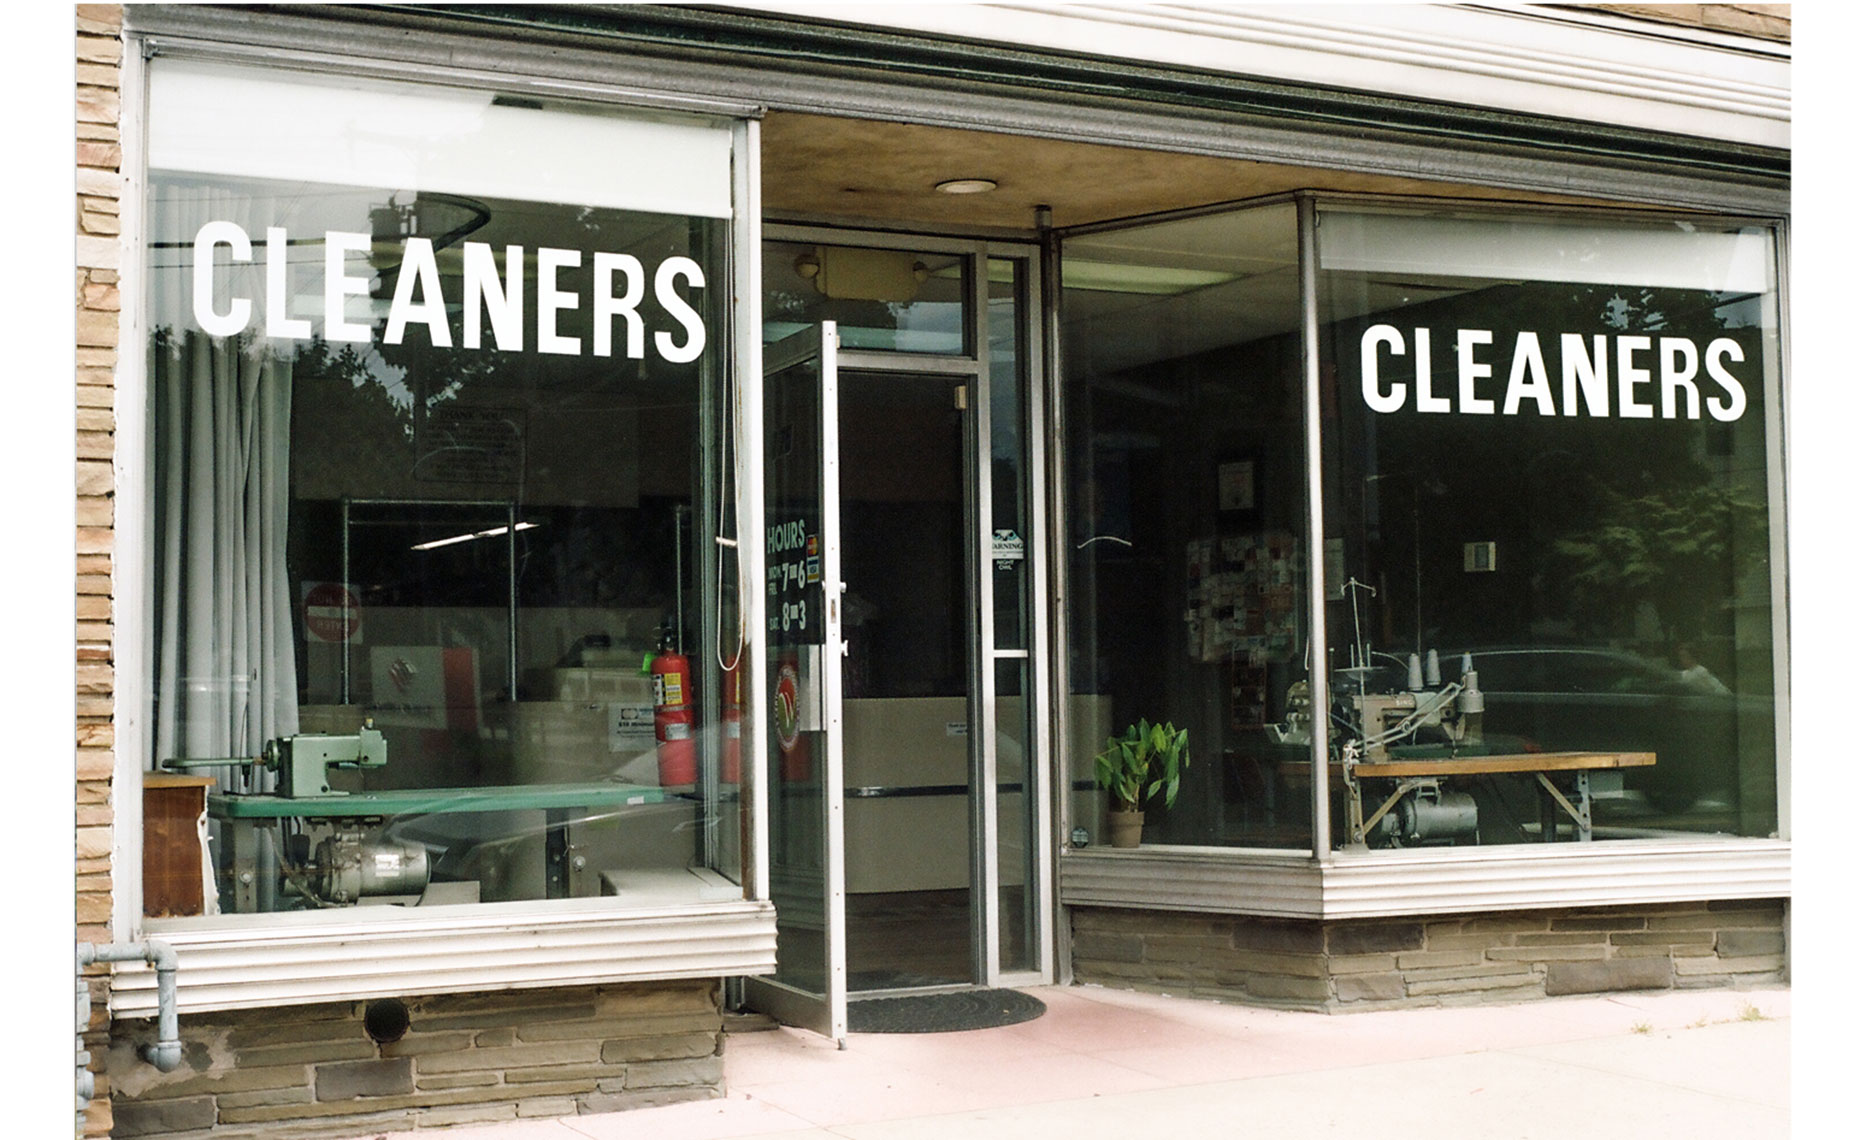 Cleaner-the-better